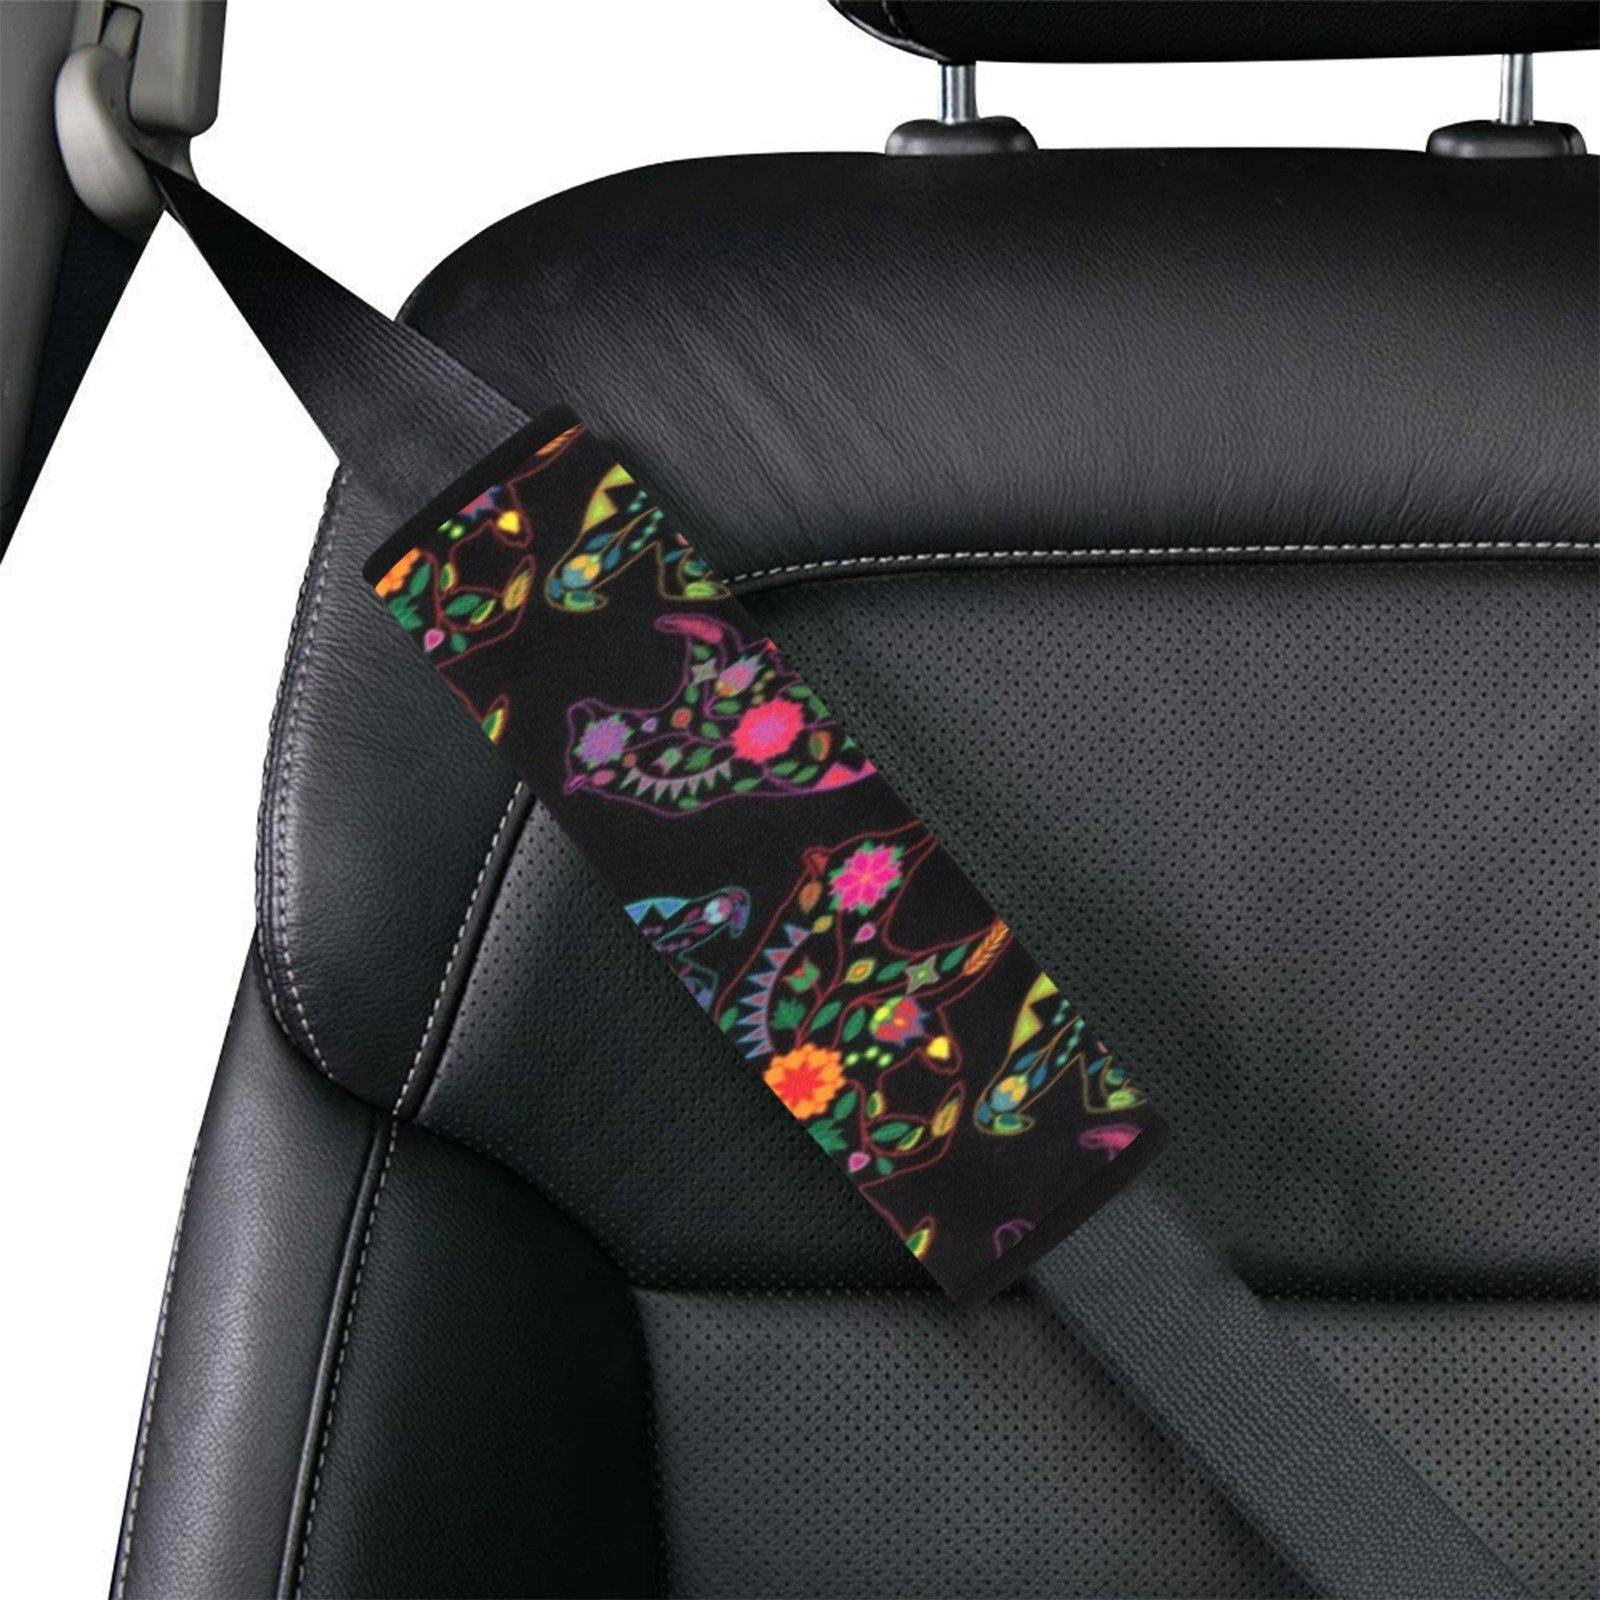 Floral Bear Car Seat Belt Cover 7''x12.6'' (Pack of 2) Car Seat Belt Cover 7x12.6 (Pack of 2) e-joyer 